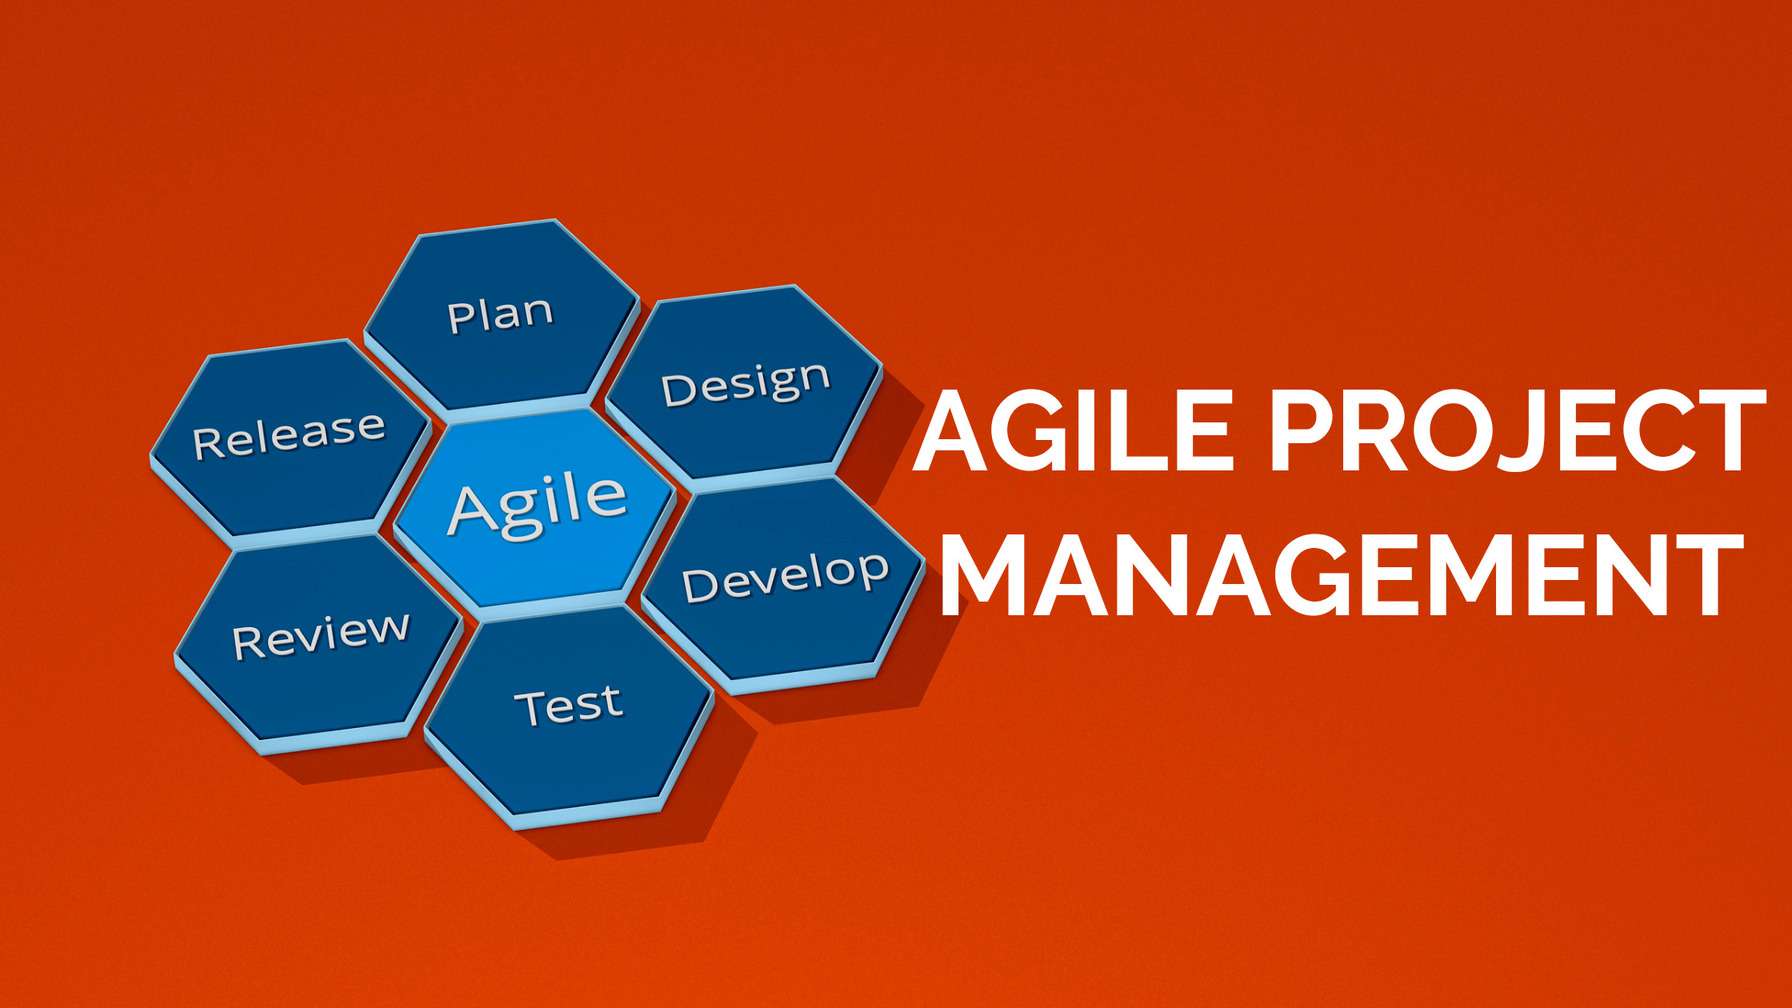 Agile project management methodology is becoming popular in industries other than software design. Here's how you can determine if your organization would benefit from it